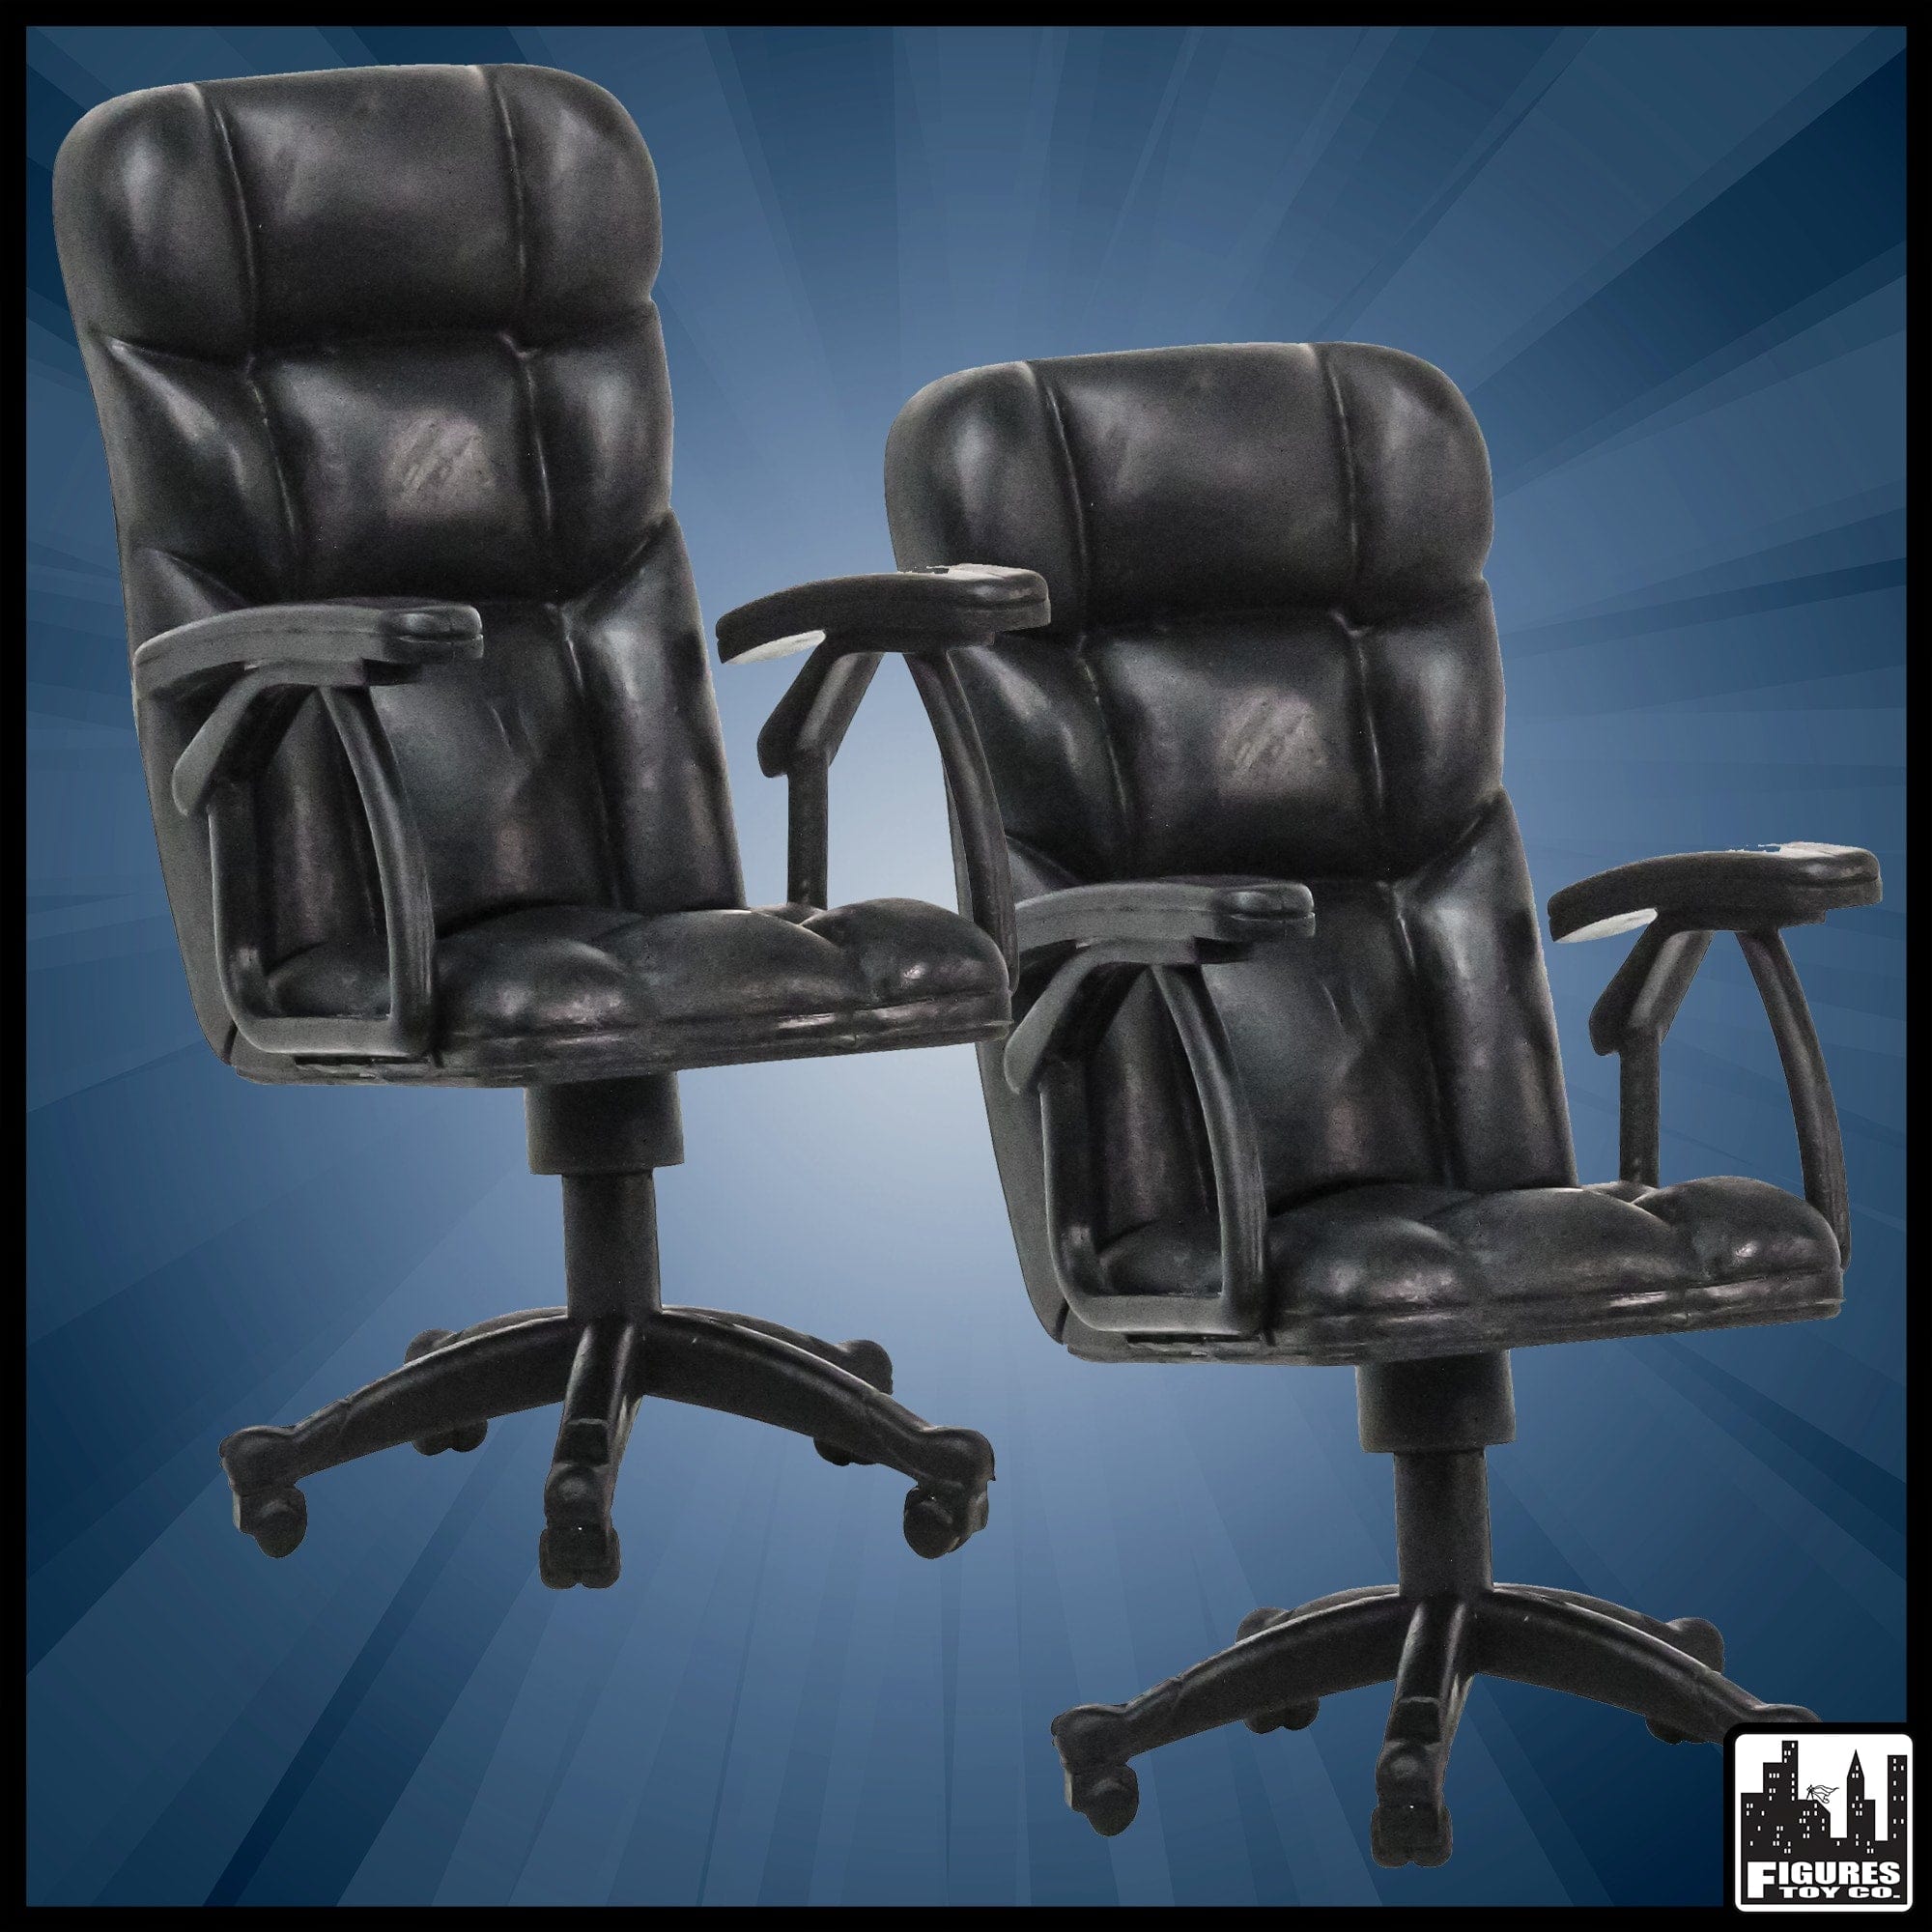 Set of 2 Plastic Toy Breakable Office Chairs for WWE Wrestling Action Figures